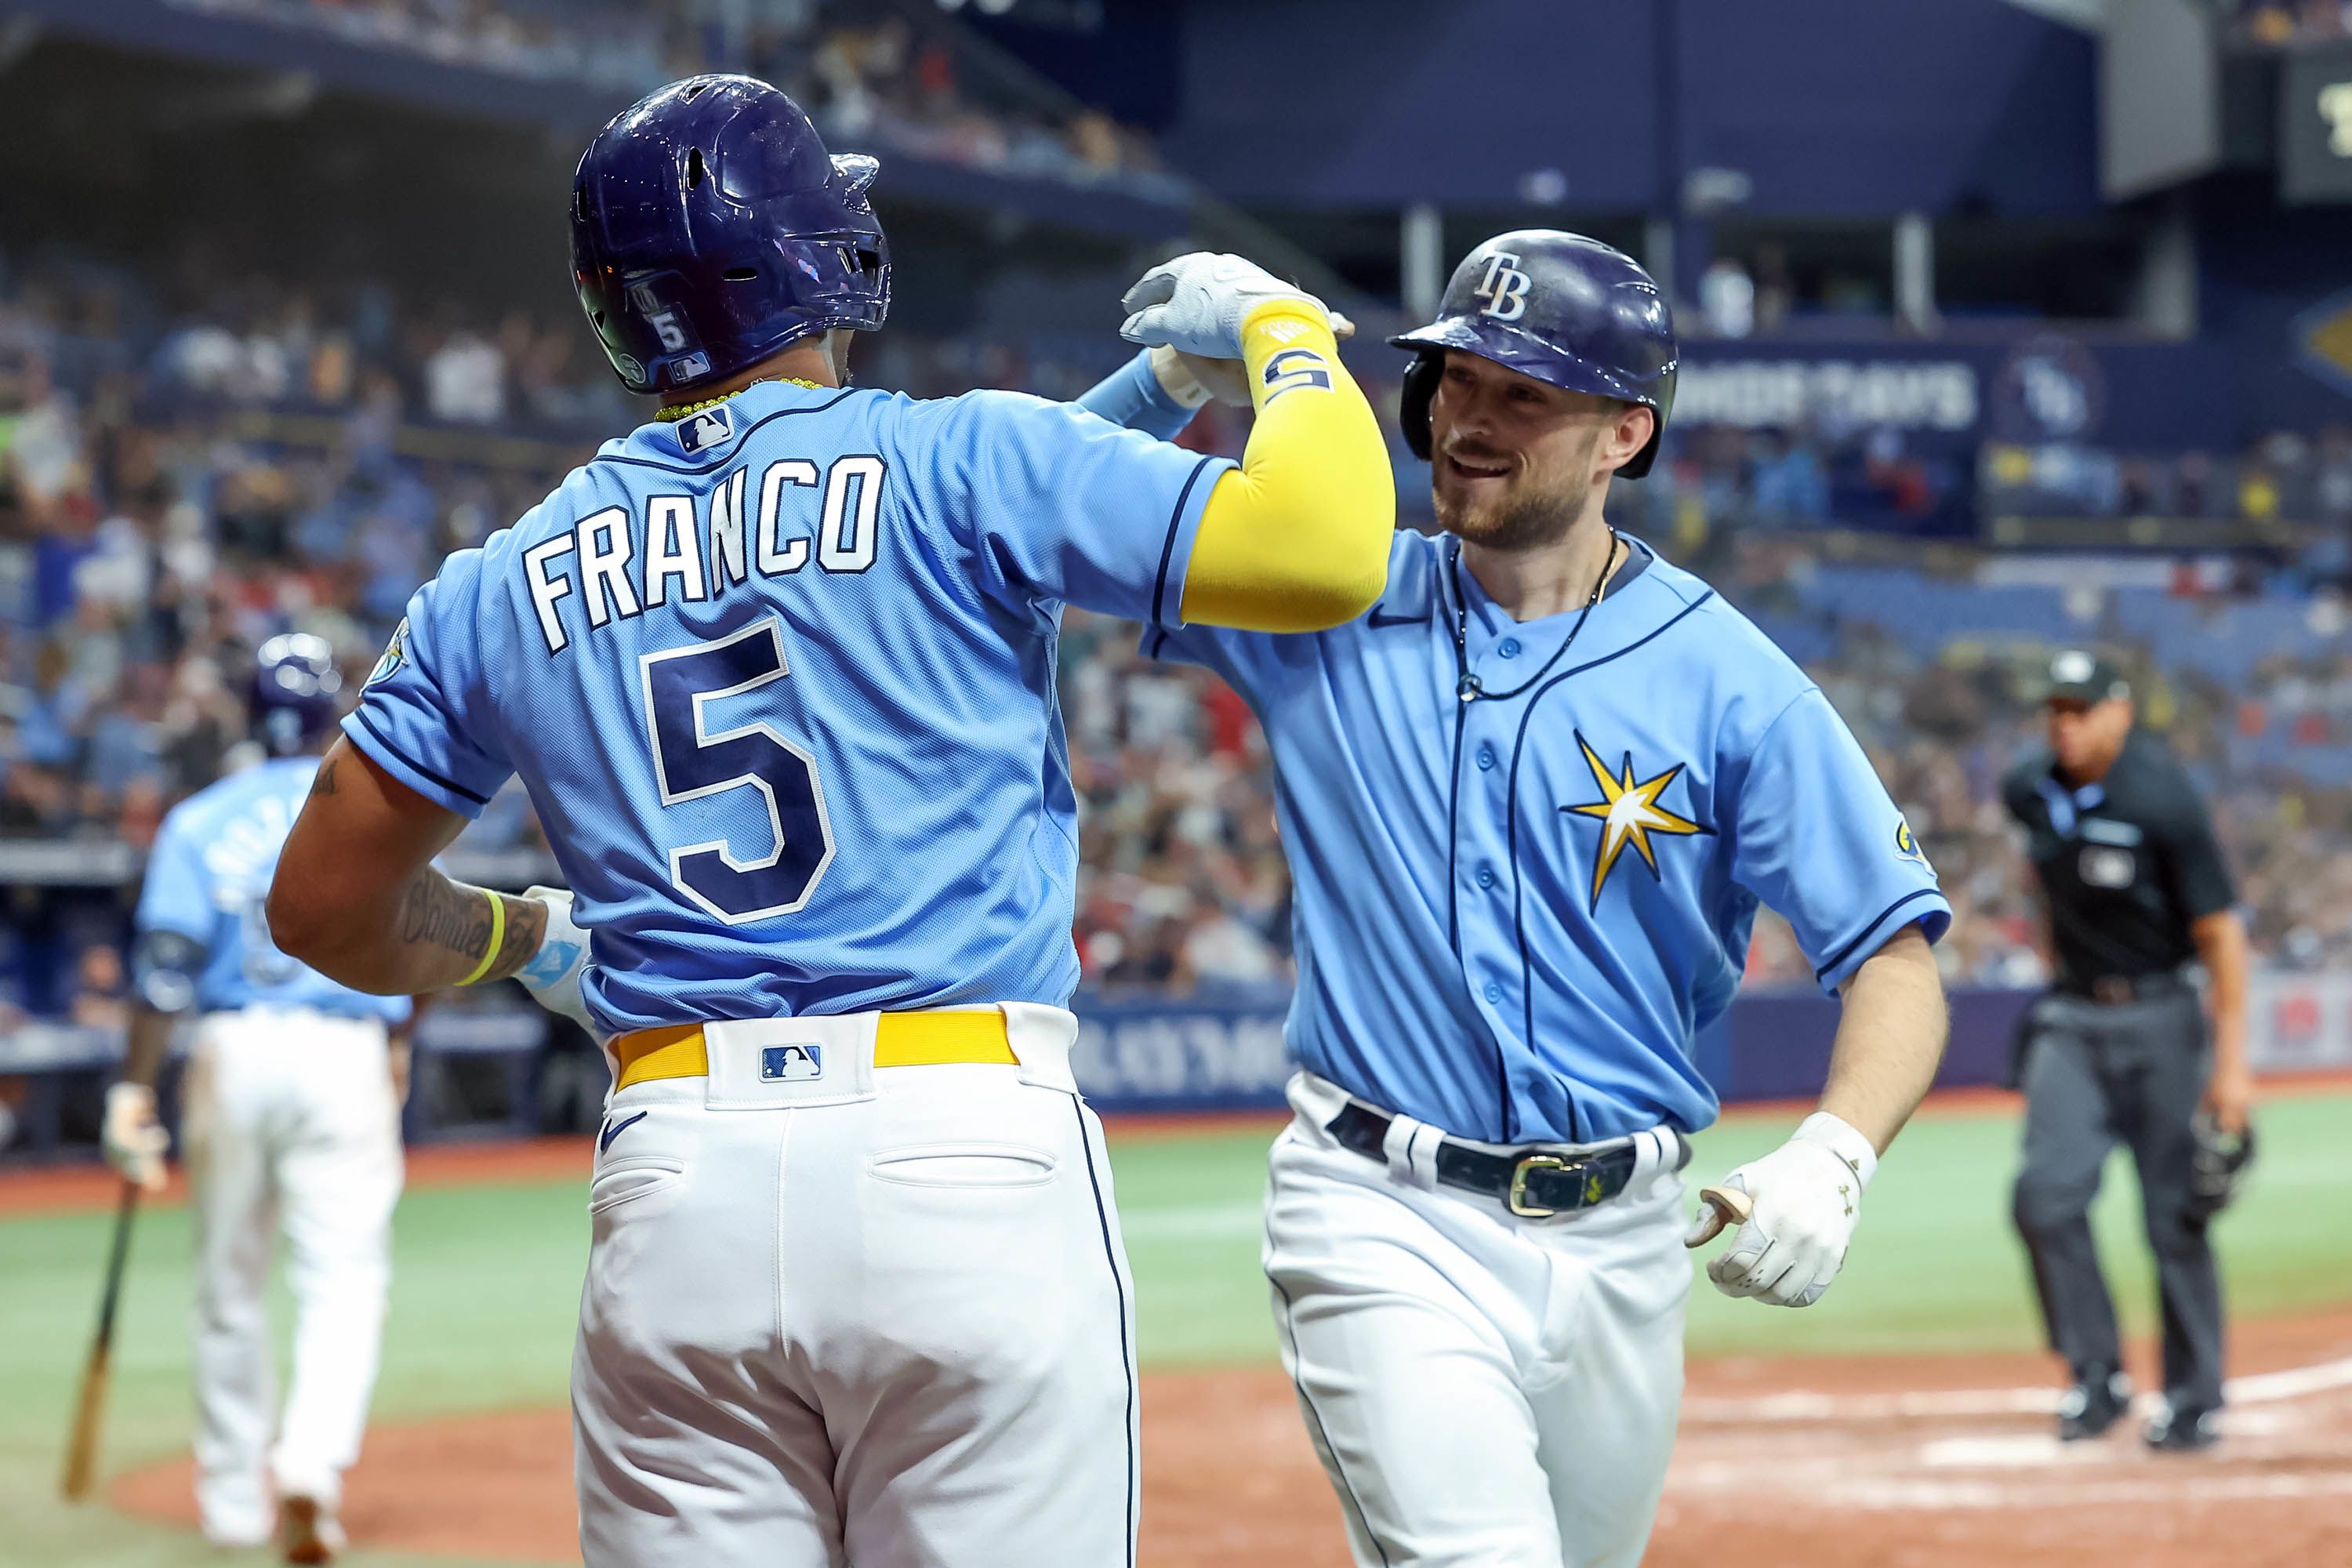 Bay Rays beat Boston Red Sox to become the first team since 1987 to start a season 11-0 | CNN